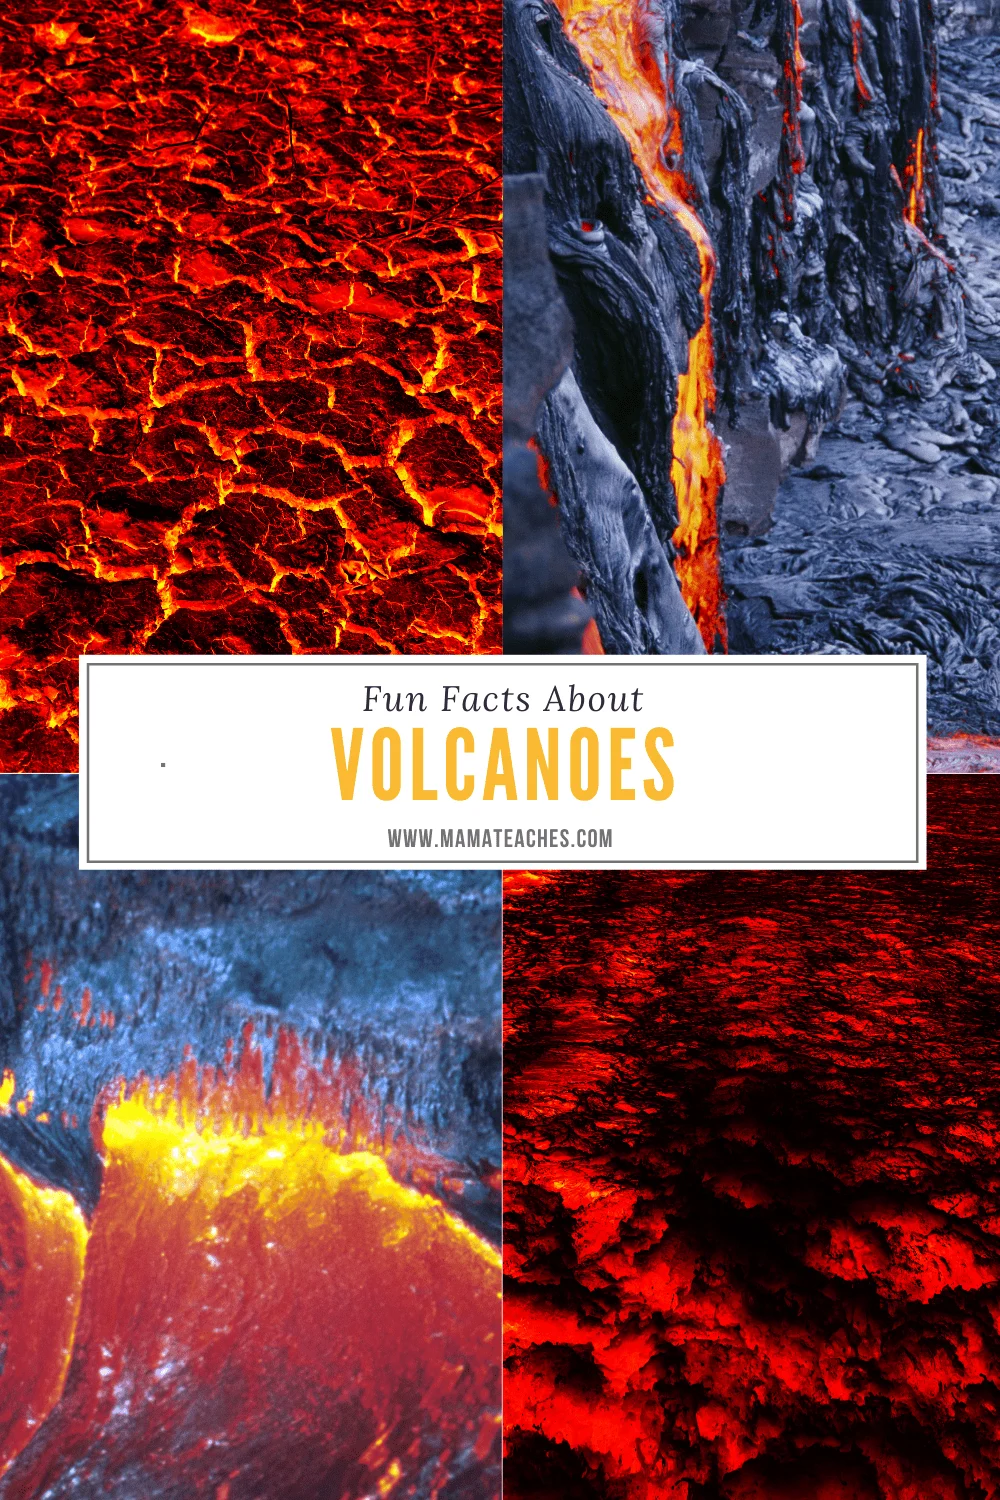 Fun Facts About Volcanoes